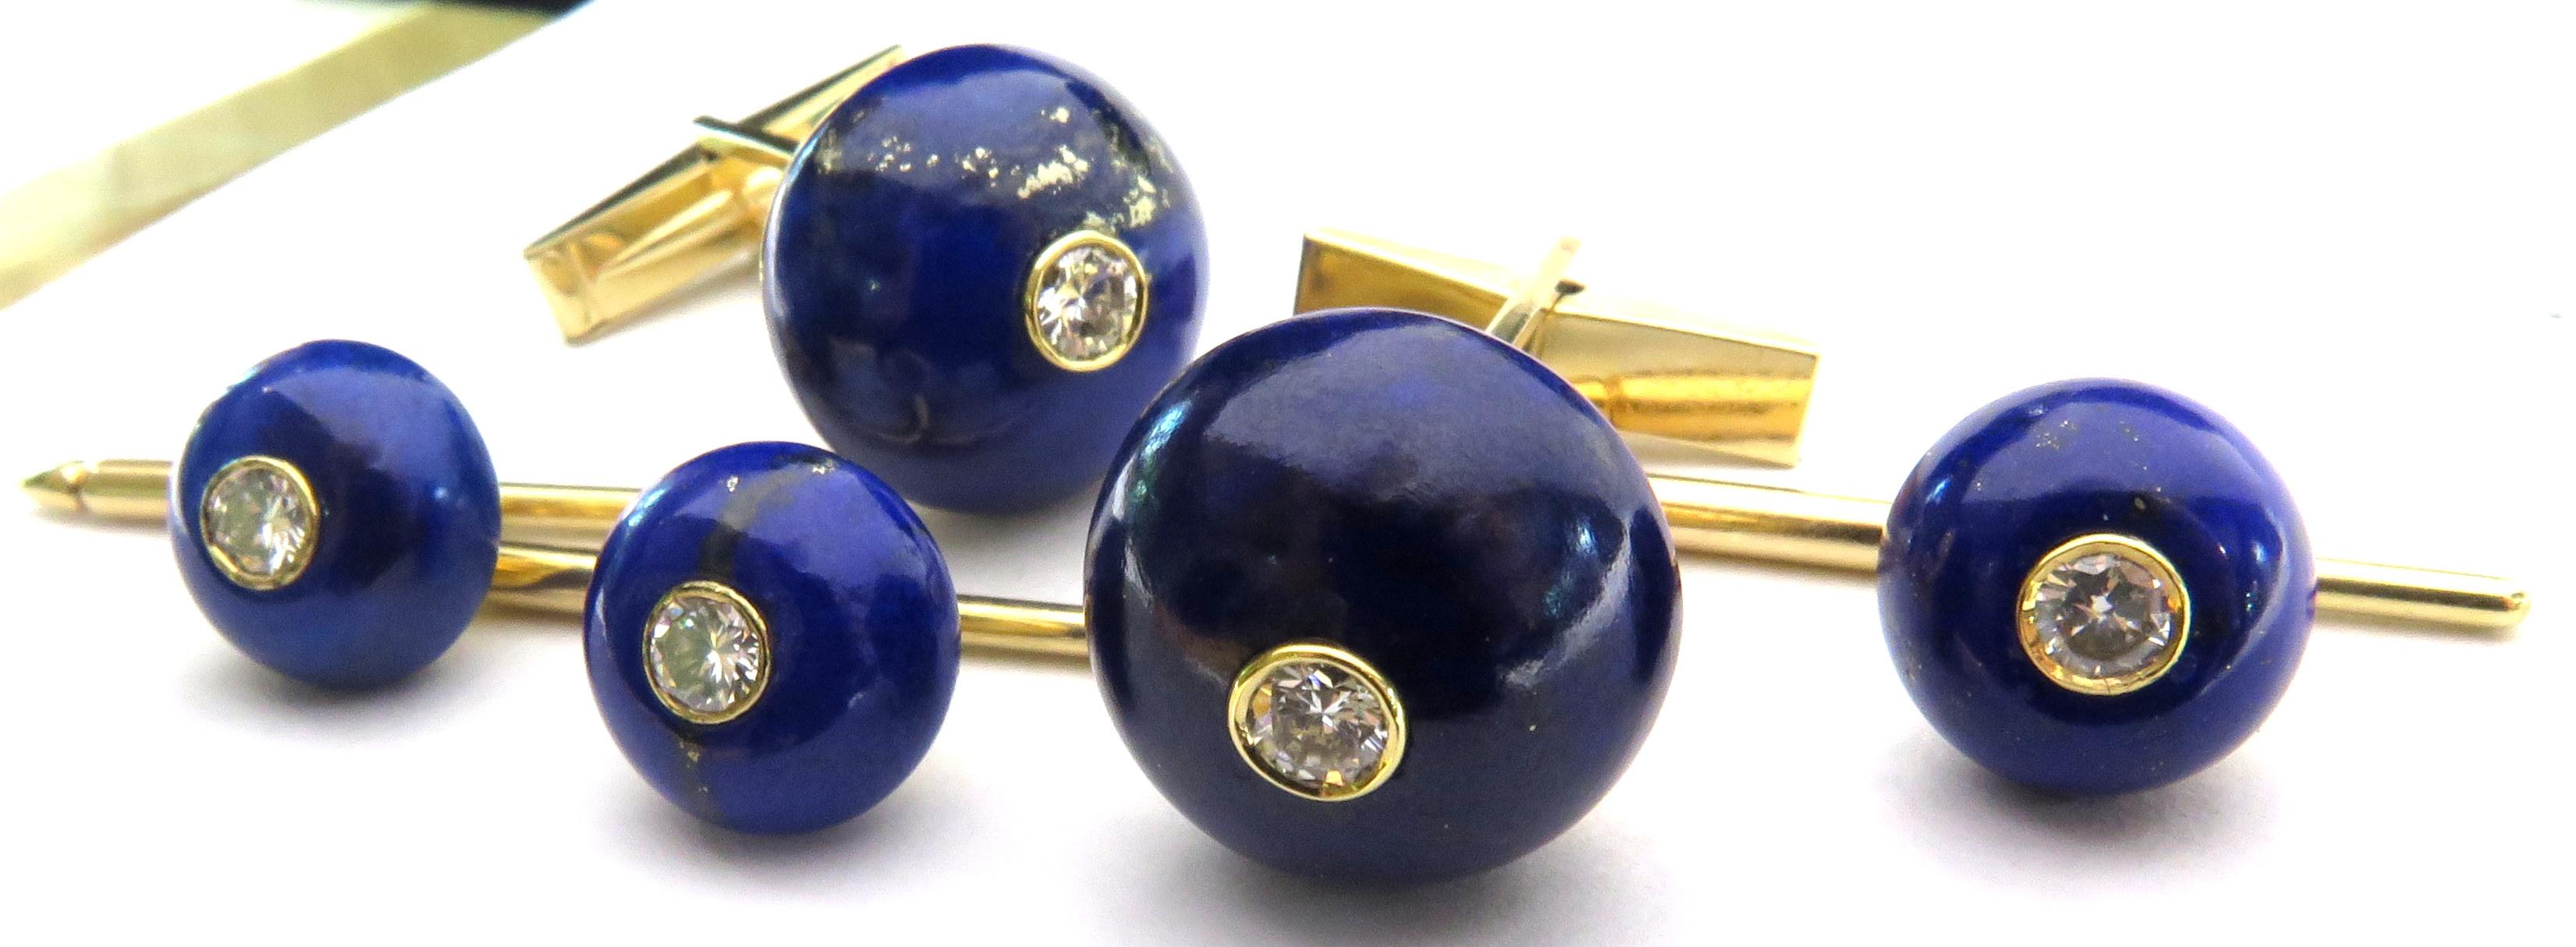 This incredible stud set made by Julius Cohen is pure elegance. The buttons of lapis lazuli are naturally enhanced with iron pyrite throughout the lapis. This stud set contains 1 pair of cufflinks and 3 studs each containing 1 full cut bezel set